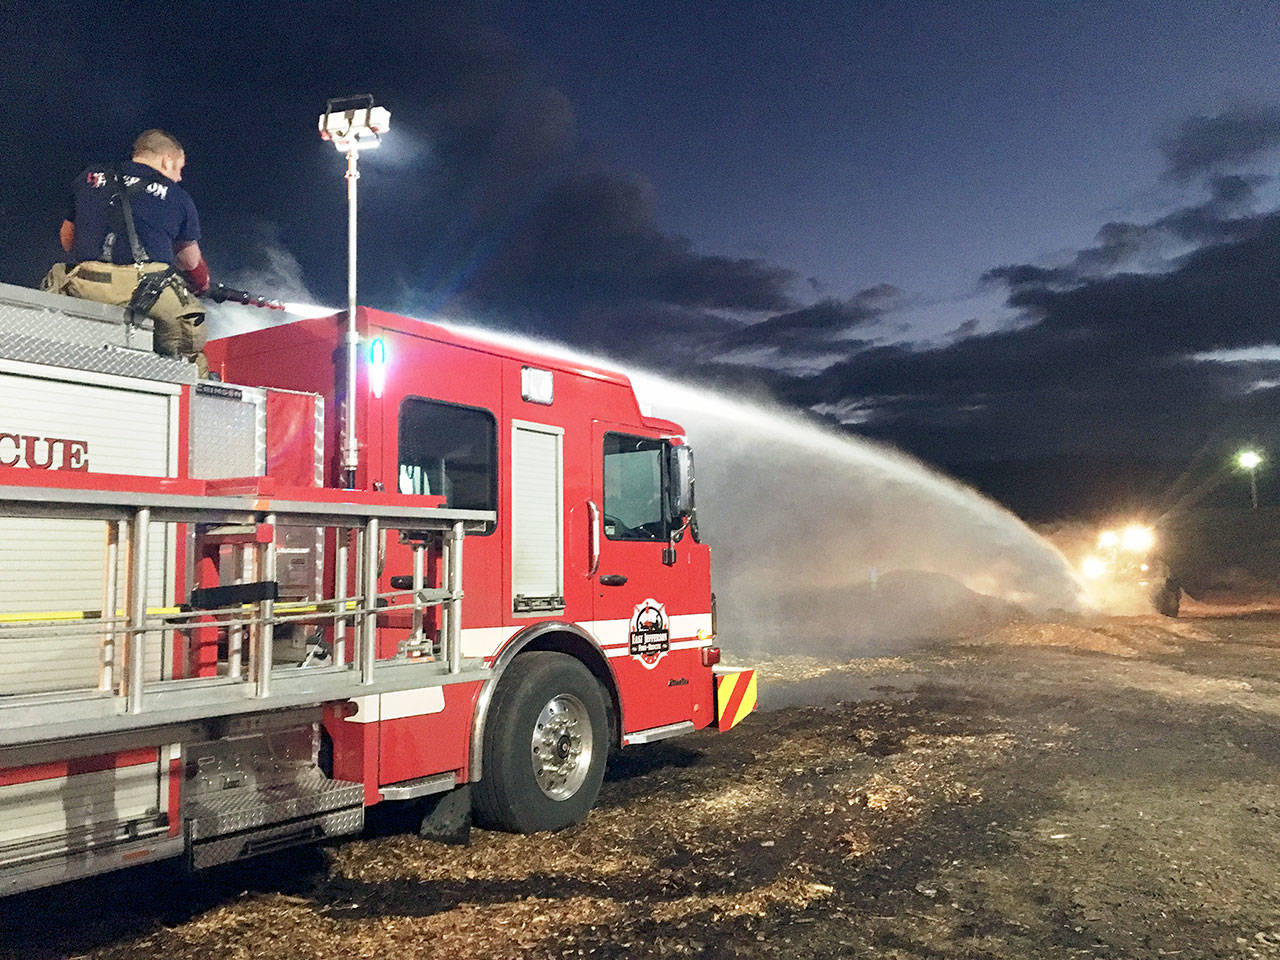 East Jefferson Fire-Rescue was called to assist in fighting a smoldering wood chip fire at the Port Townsend Paper Co. on Wednesday night. (East Jefferson Fire-Rescue)